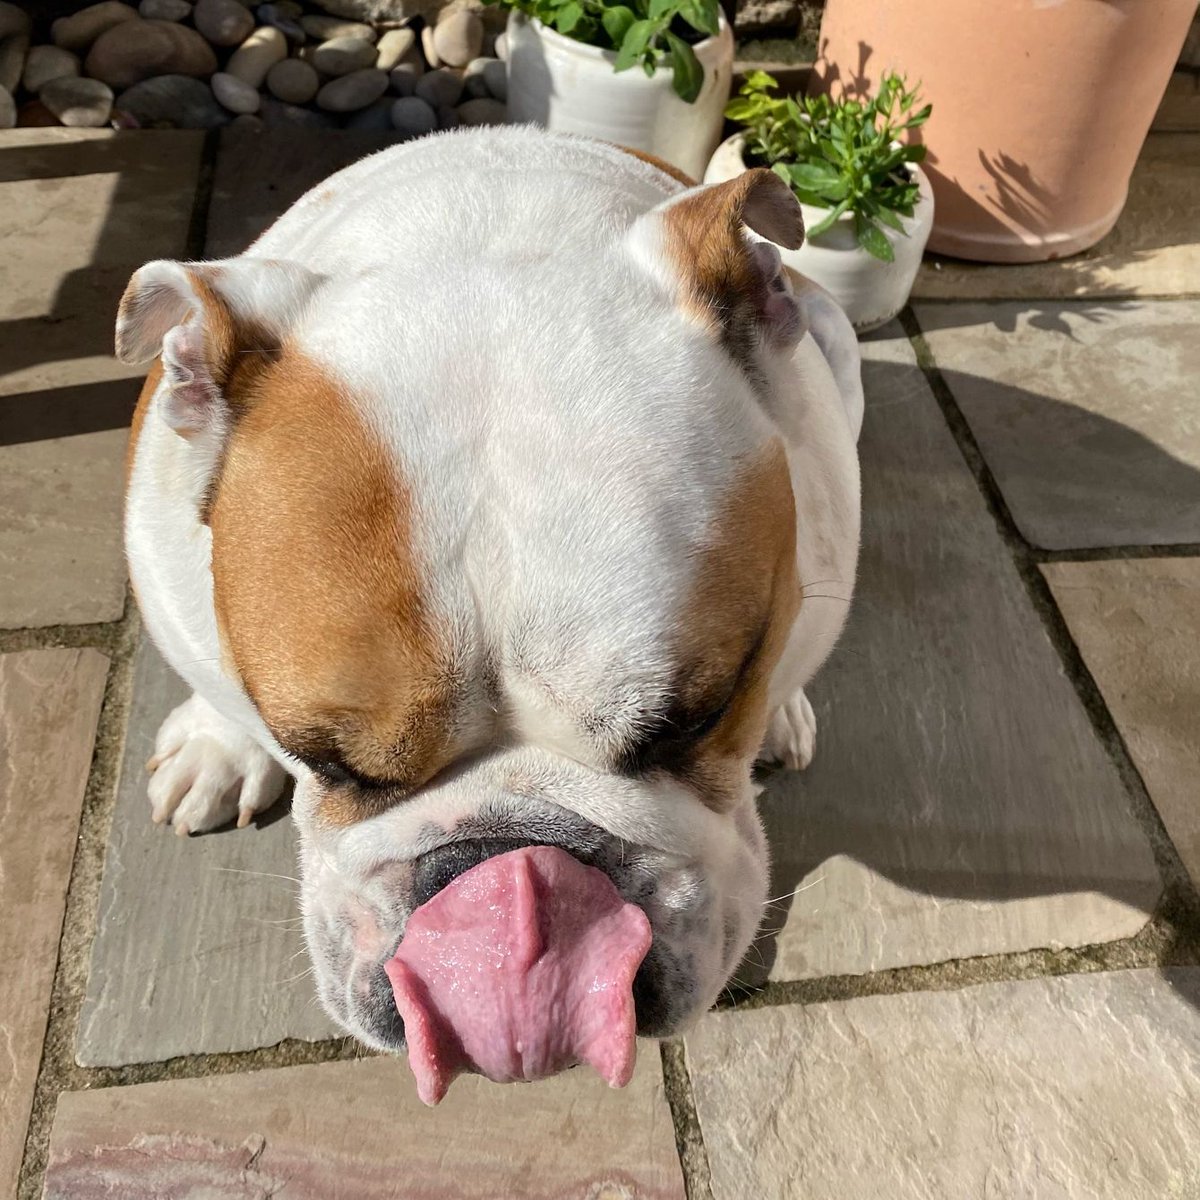 Well this is a bit of #TongueOutTuesday 👅 and a bit of #WontLookWednesday 👀 have a great day everyone 🐶🐾❤️ Barney #BarneyTheBulldog #DogsOfTwitter #DogsOfX #DogsOfIG #DogsOfFacebook #Bulldog #EnglishBulldog #TOT #Tuesday #Tongue